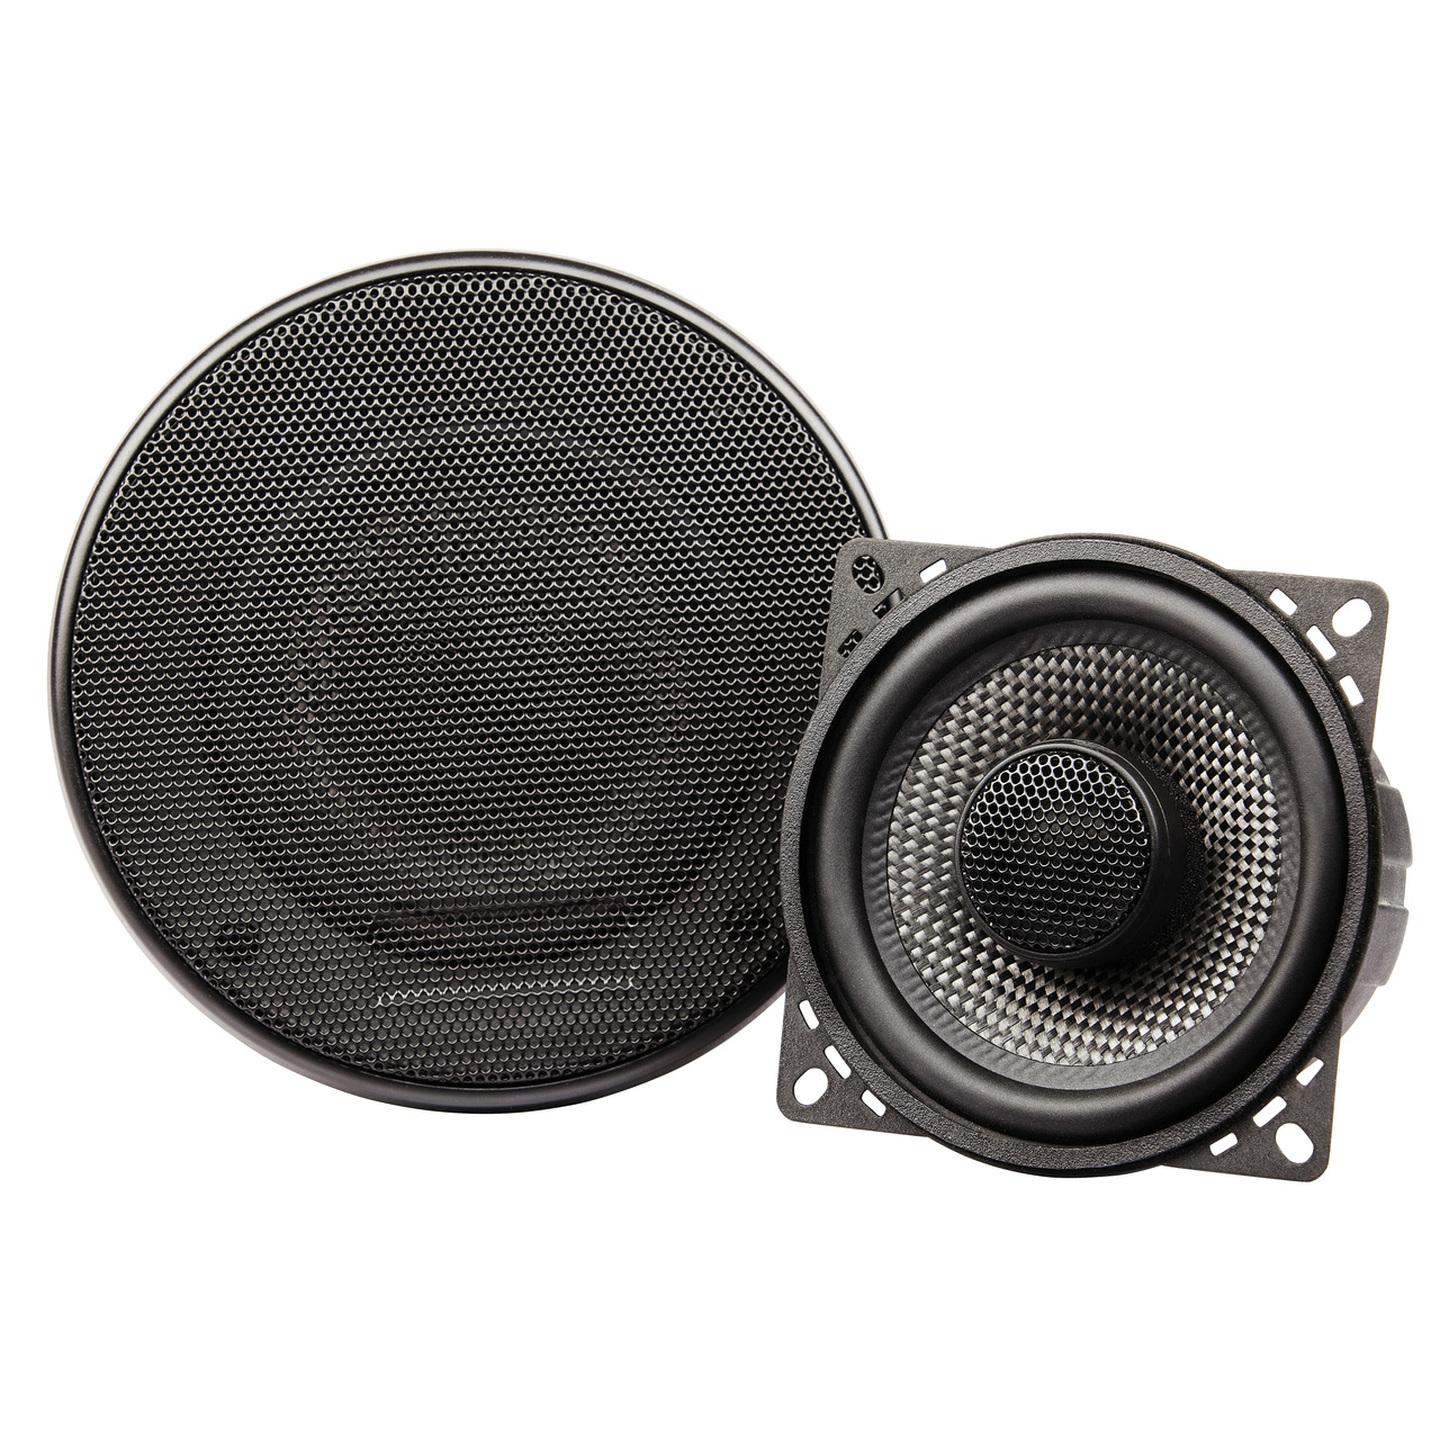 4 Inch Coaxial speakers with Silk Dome Tweeter made with Kevlar